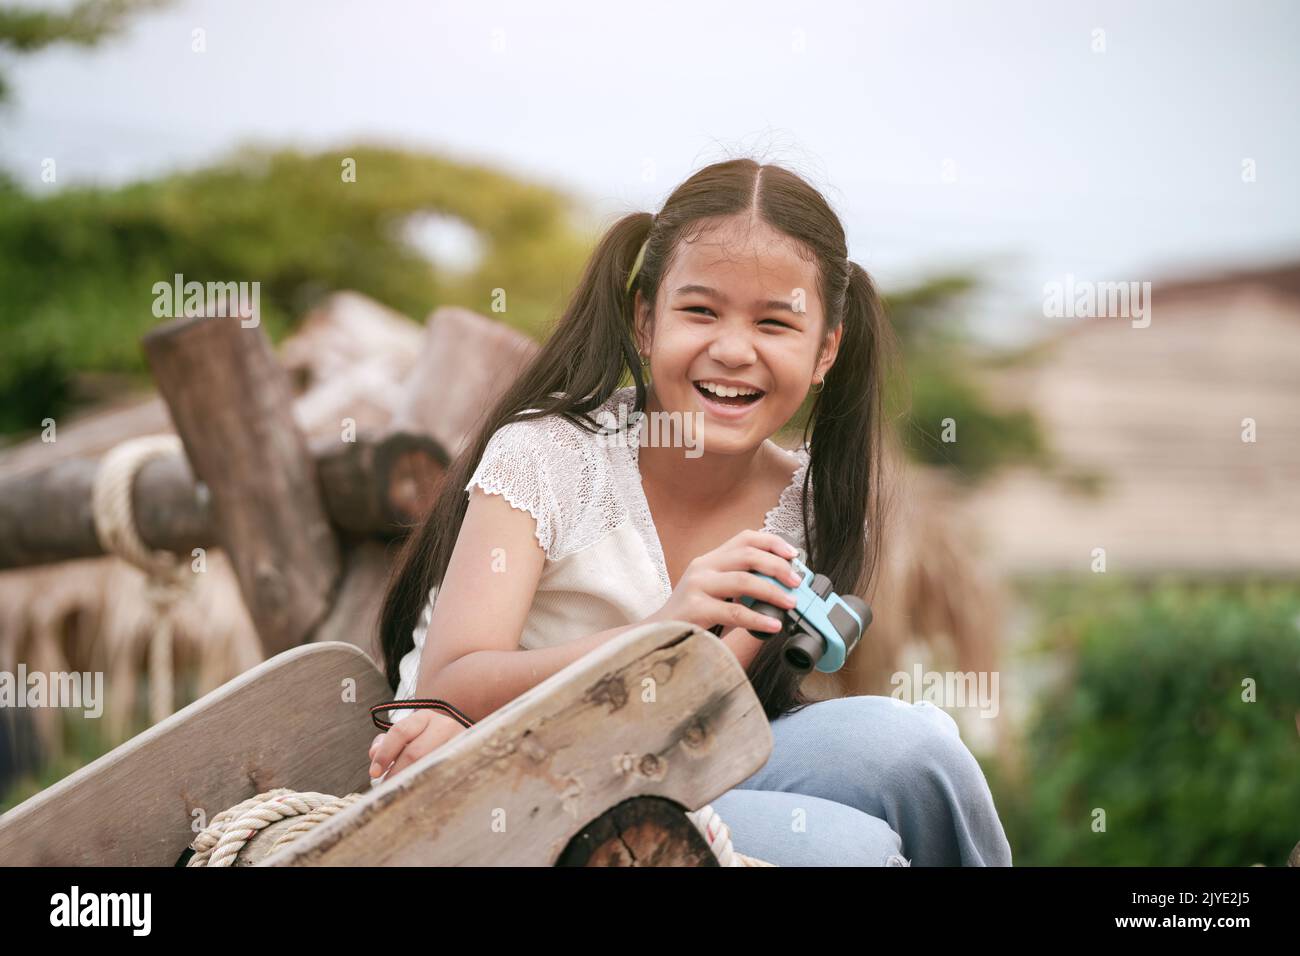 Happy girl kid is laughing and holding binoculars in her hands in the playground. Stock Photo